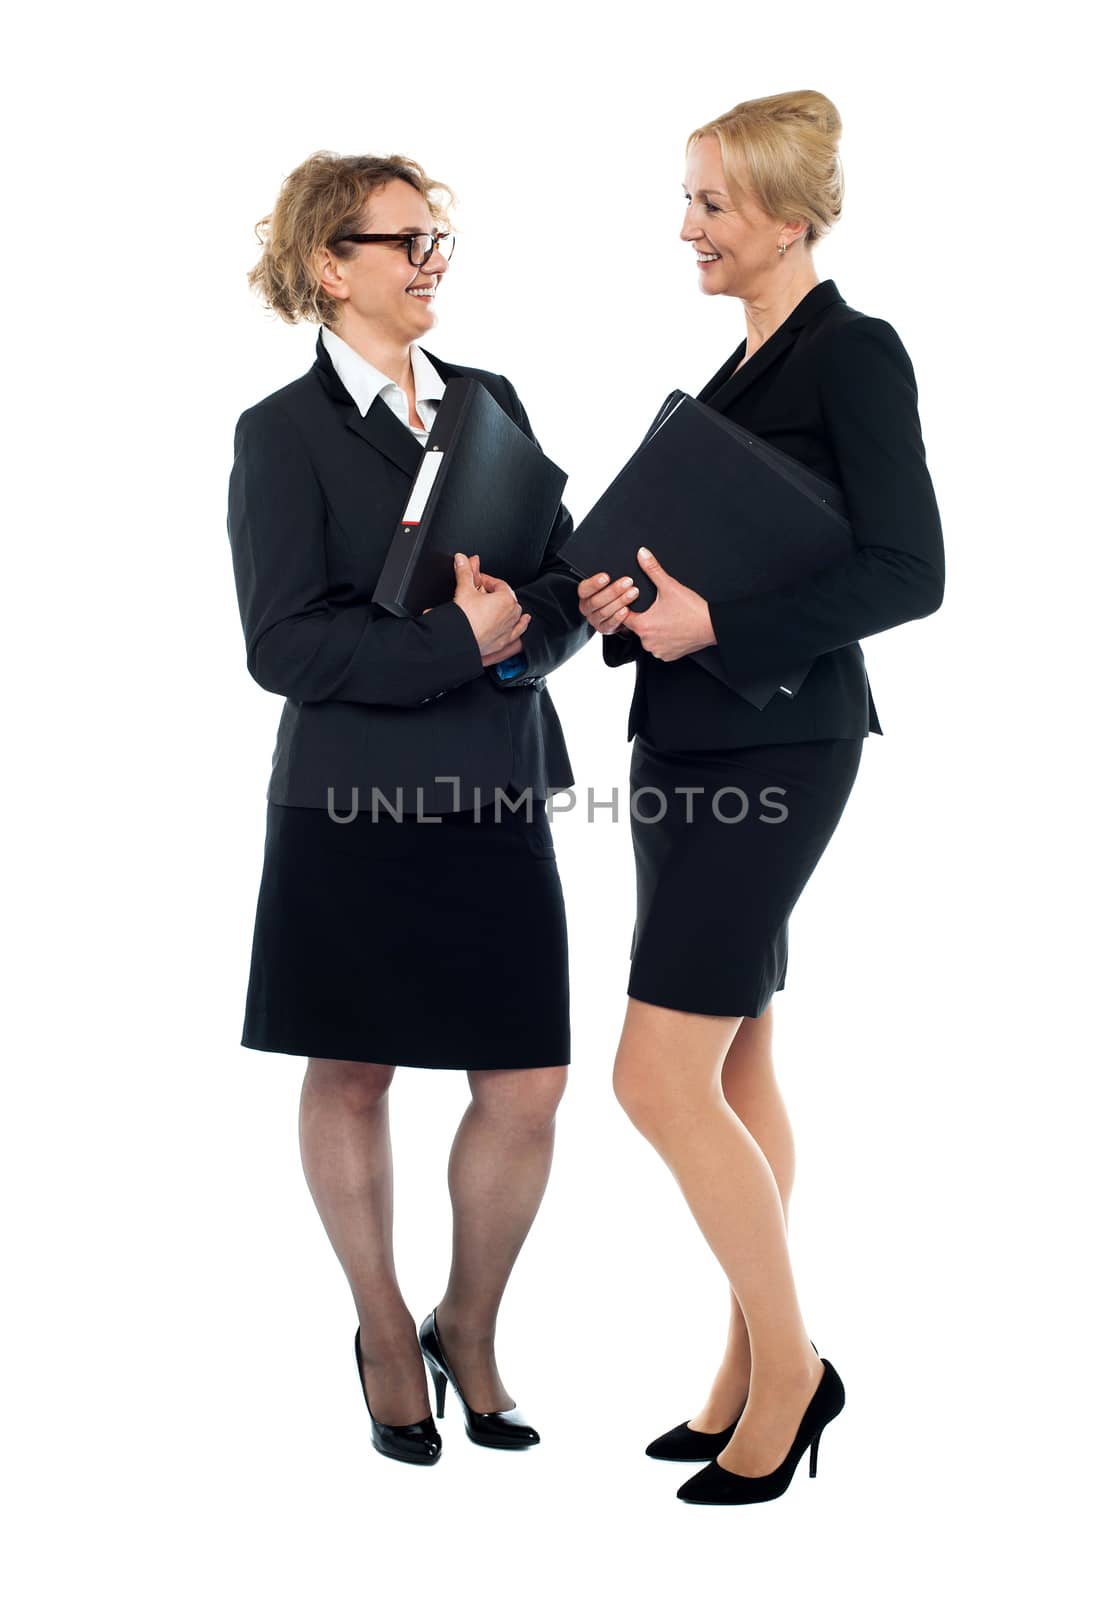 Businesswomen holding documents and interacting